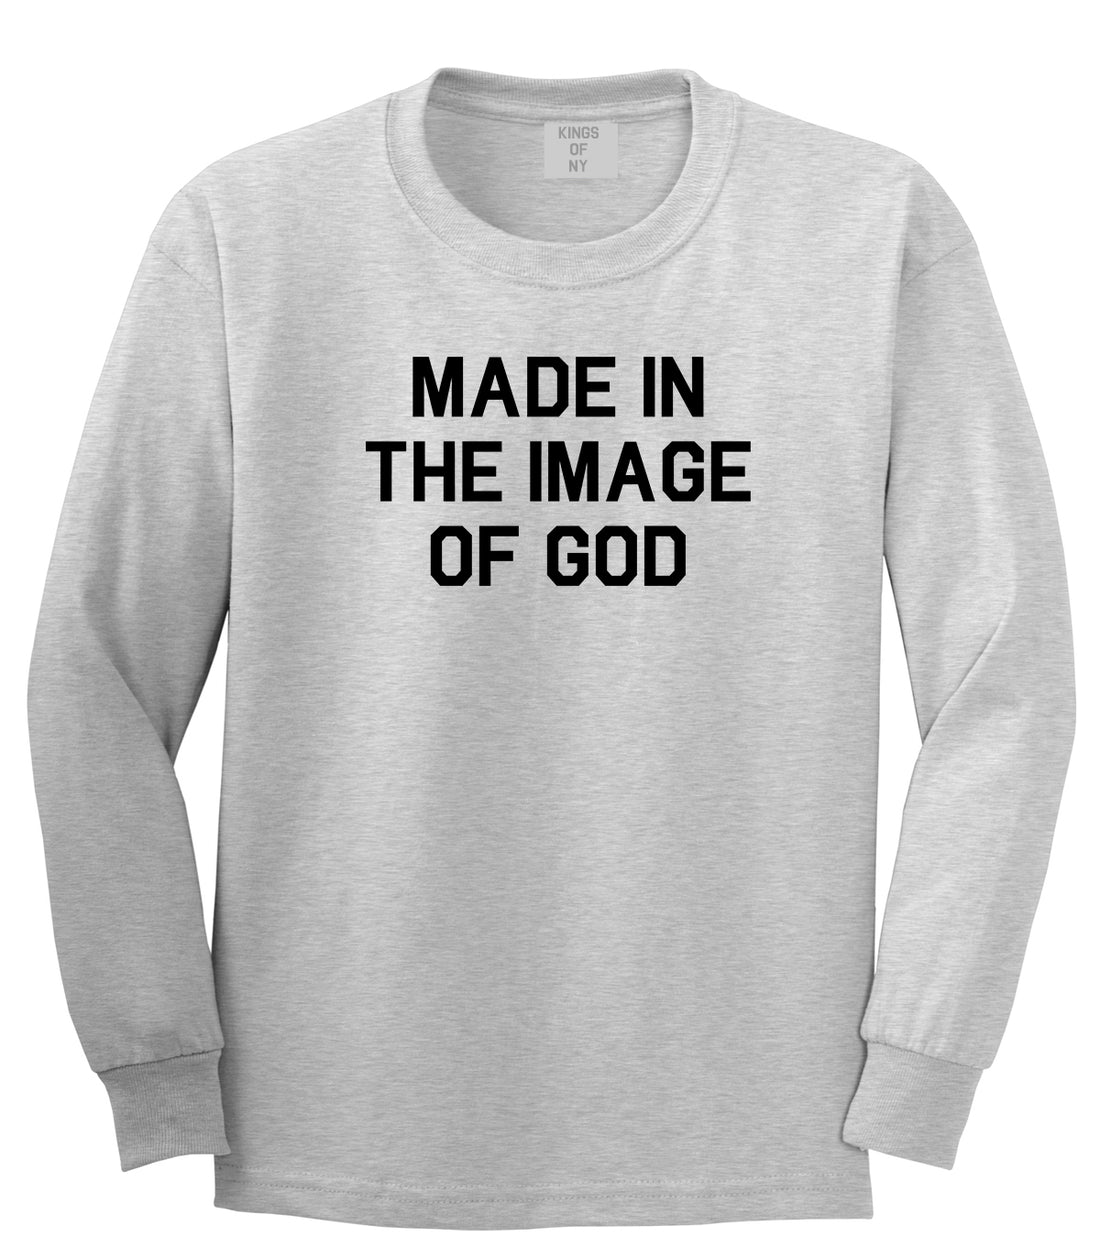 Made In The Image Of God Mens Long Sleeve T-Shirt Grey by Kings Of NY